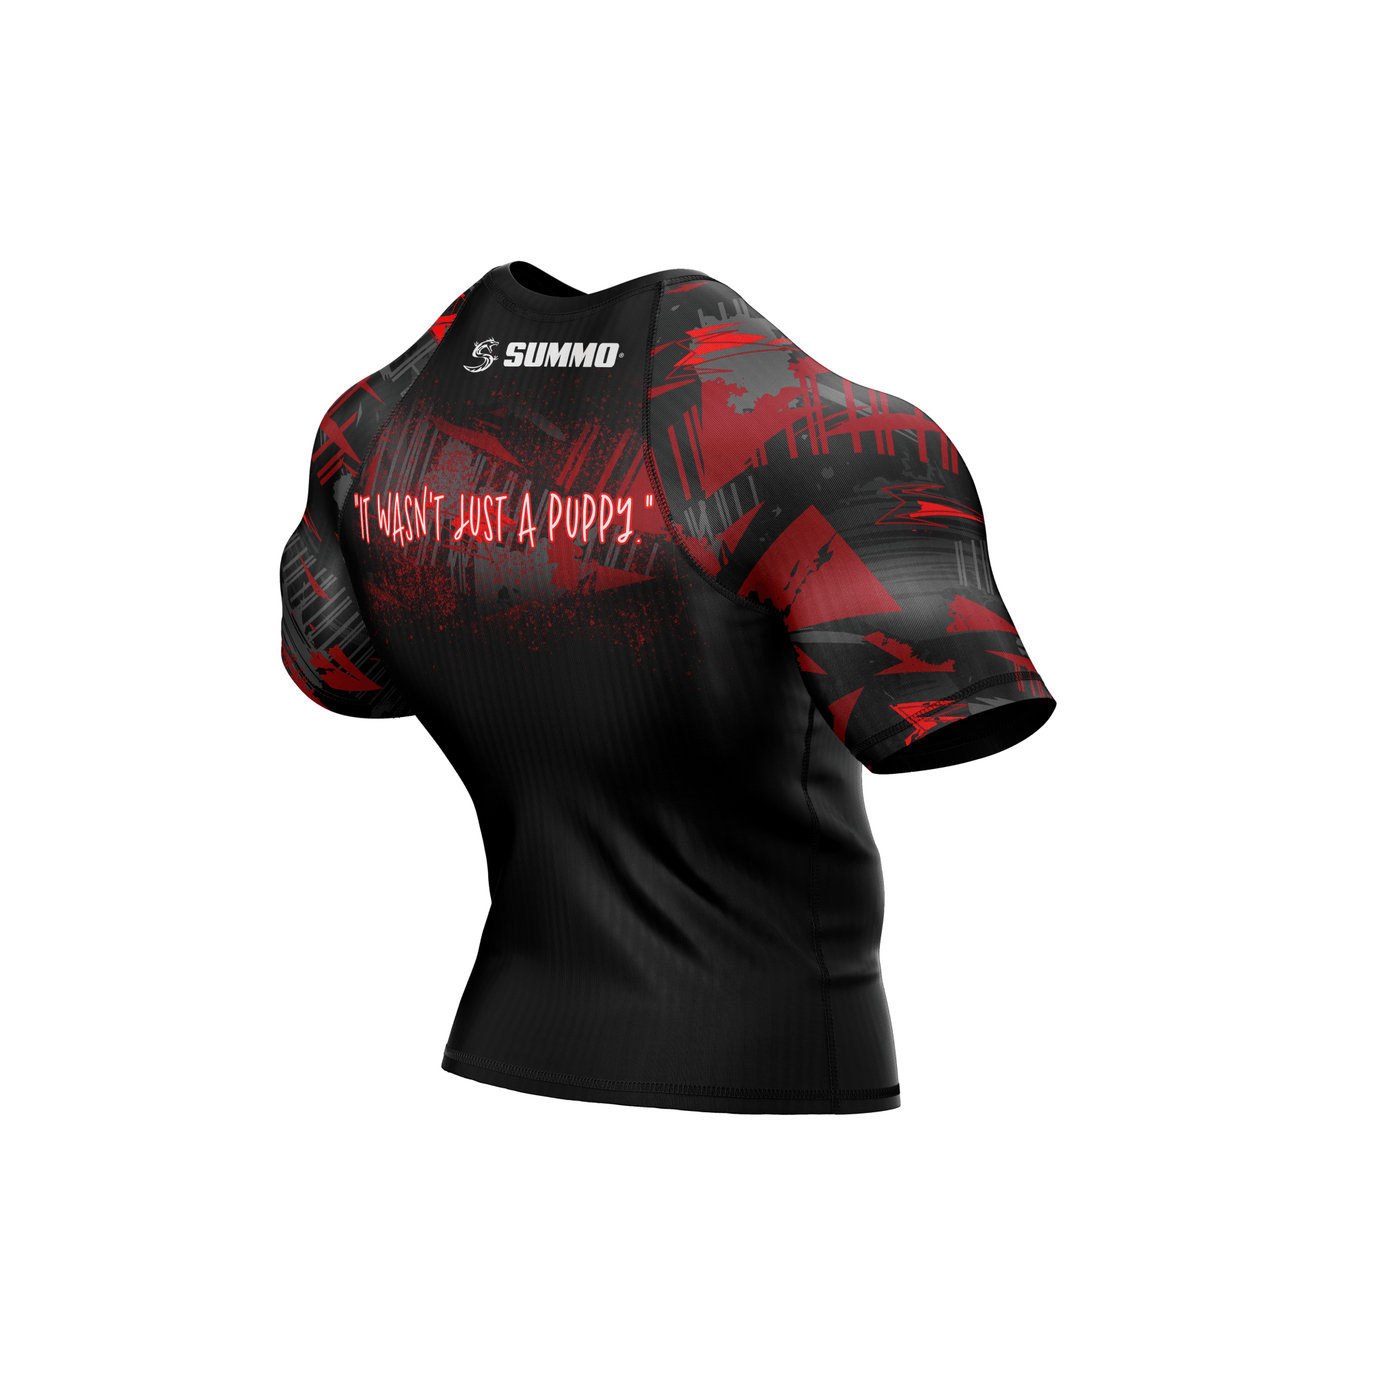 BJJ Rash Guards Sale up to 60%, #1 Rated BJJ Brand